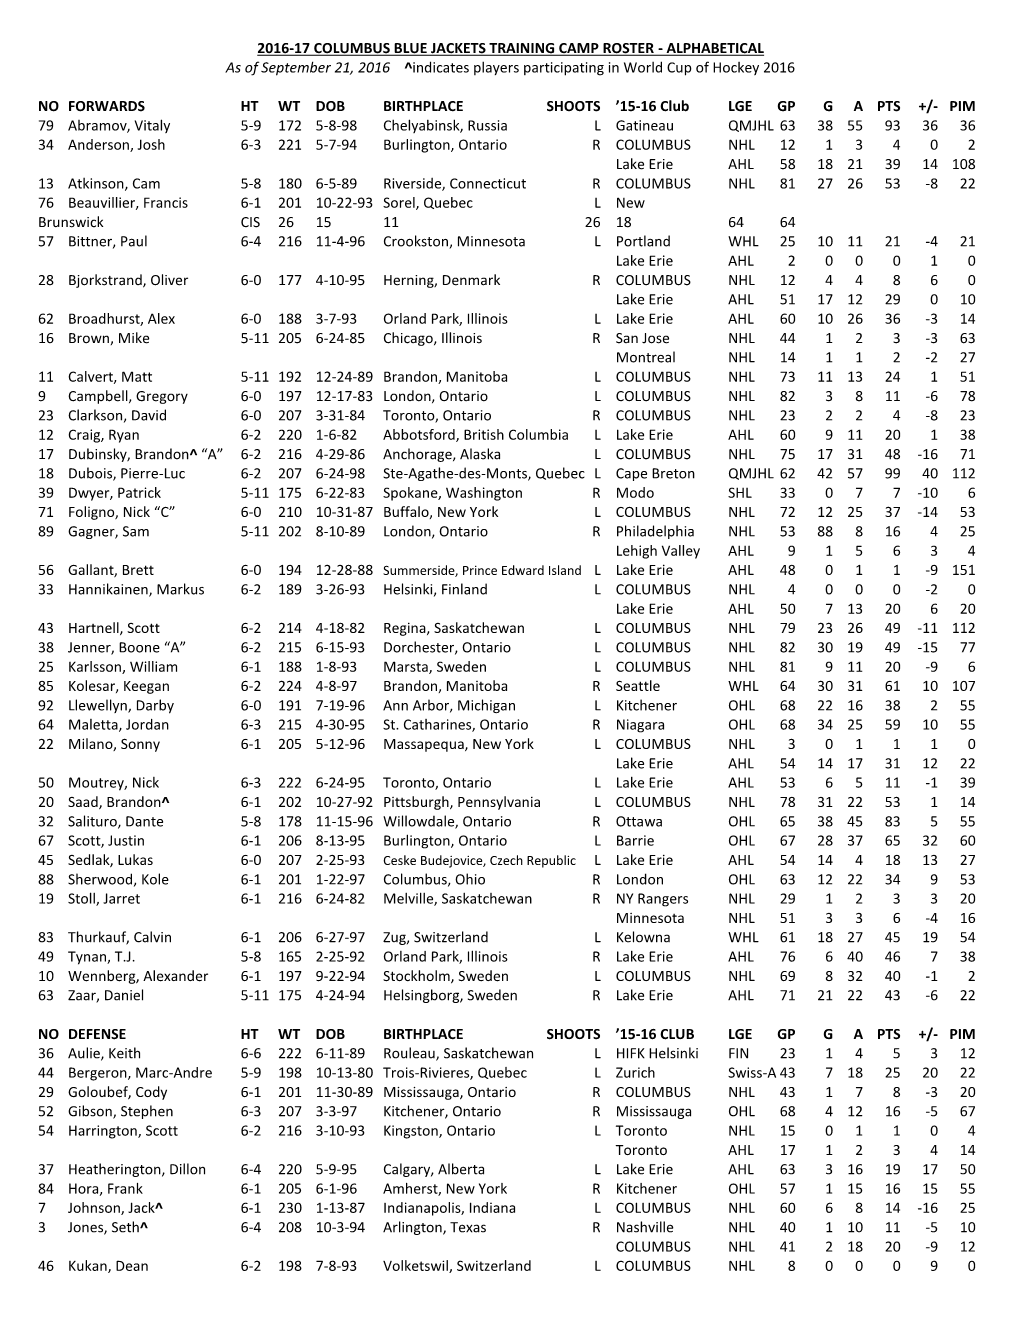 2016-17 COLUMBUS BLUE JACKETS TRAINING CAMP ROSTER - ALPHABETICAL As of September 21, 2016 ^Indicates Players Participating in World Cup of Hockey 2016